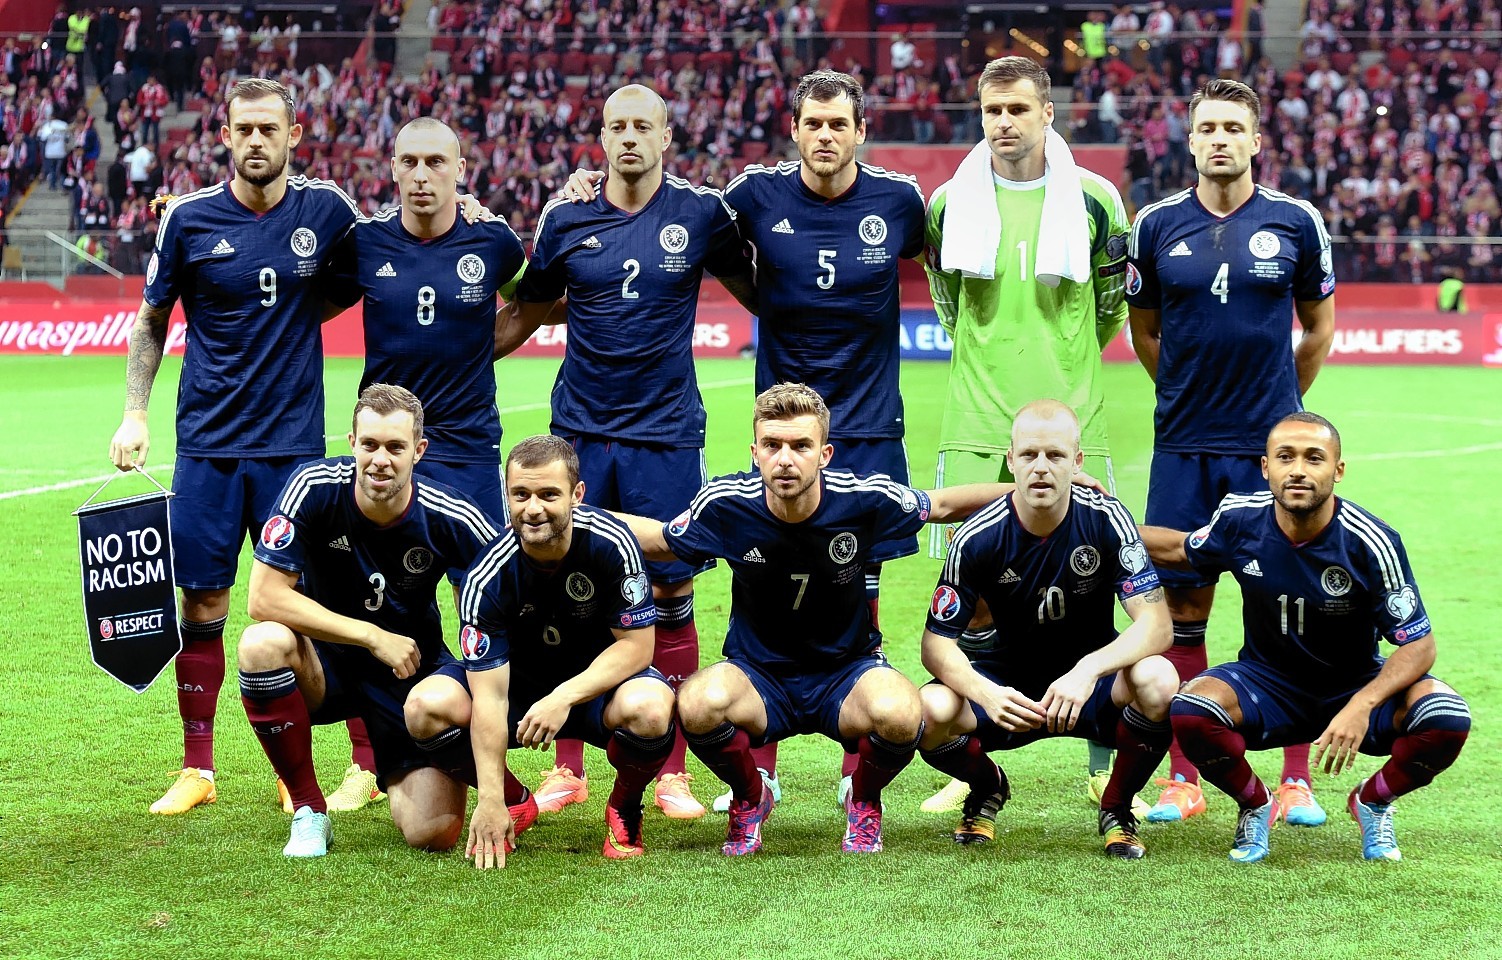 The Scotland team line up ahead of the match